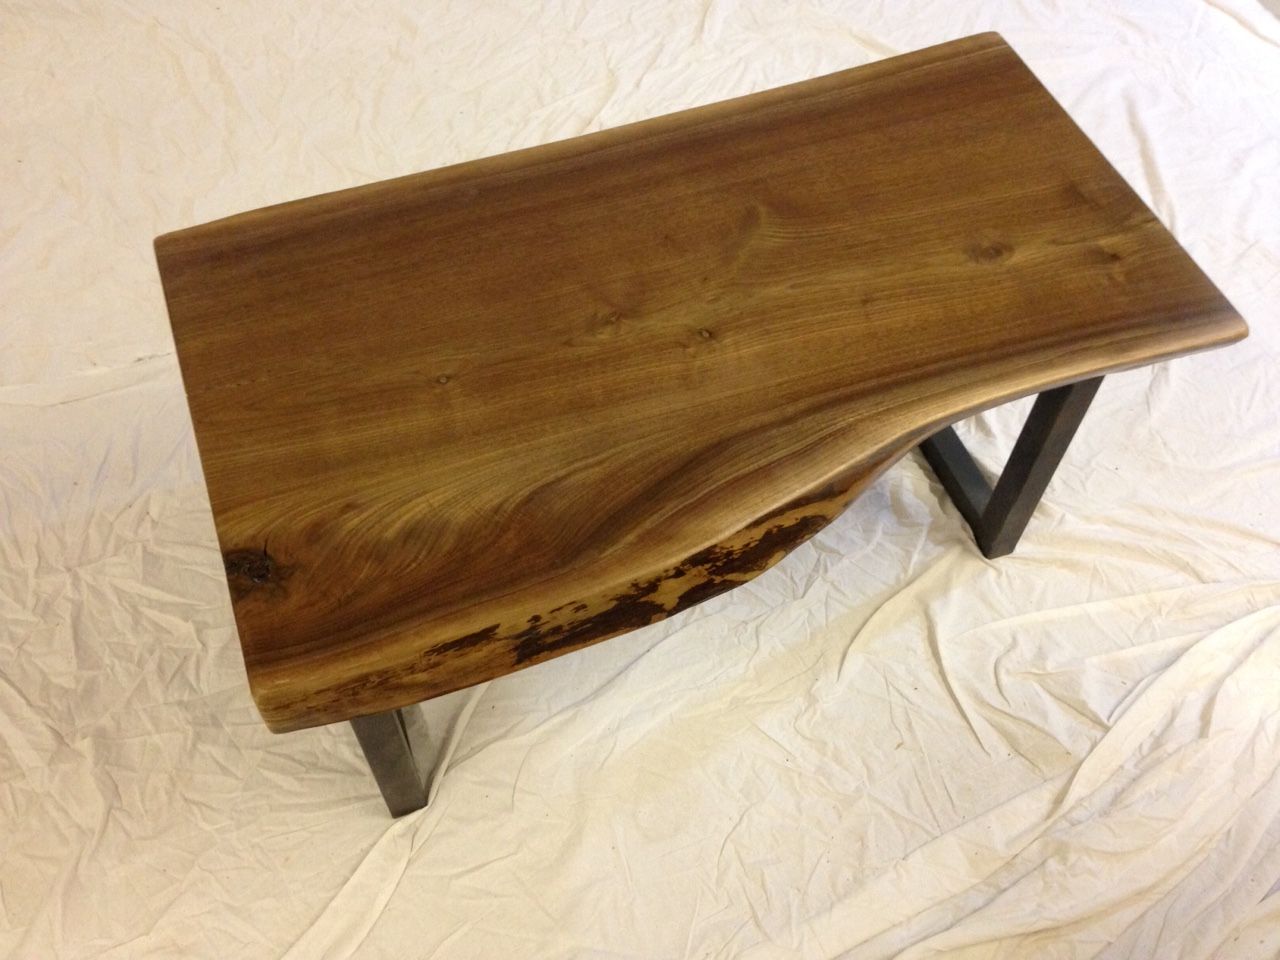 Live Edge Black Walnut Slab Coffee Table (item #41) Pertaining To Well Known Hand Finished Walnut Coffee Tables (View 11 of 20)